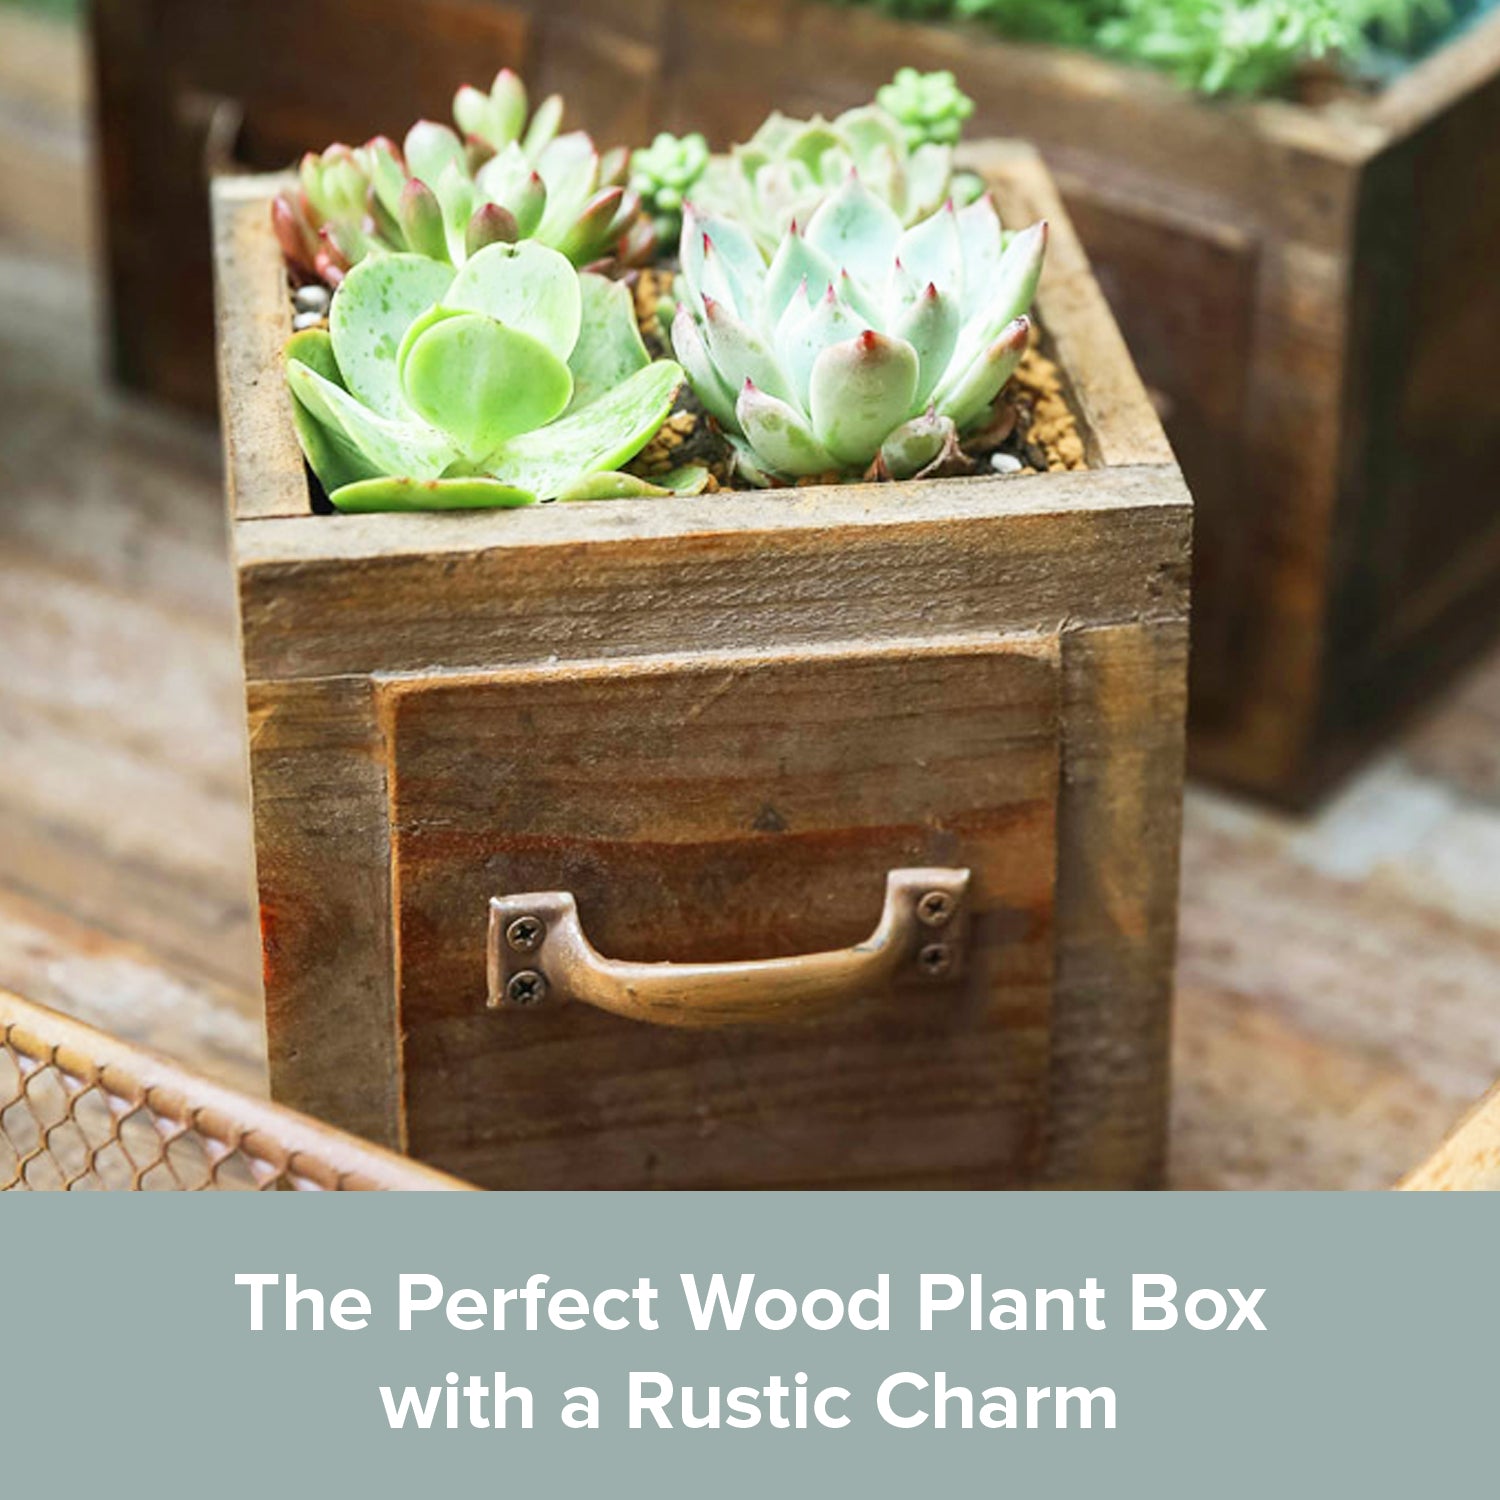 Load image into Gallery viewer, Country Style Wood Planter Box | Decorative Wooden Boxes for Flower Arrangements